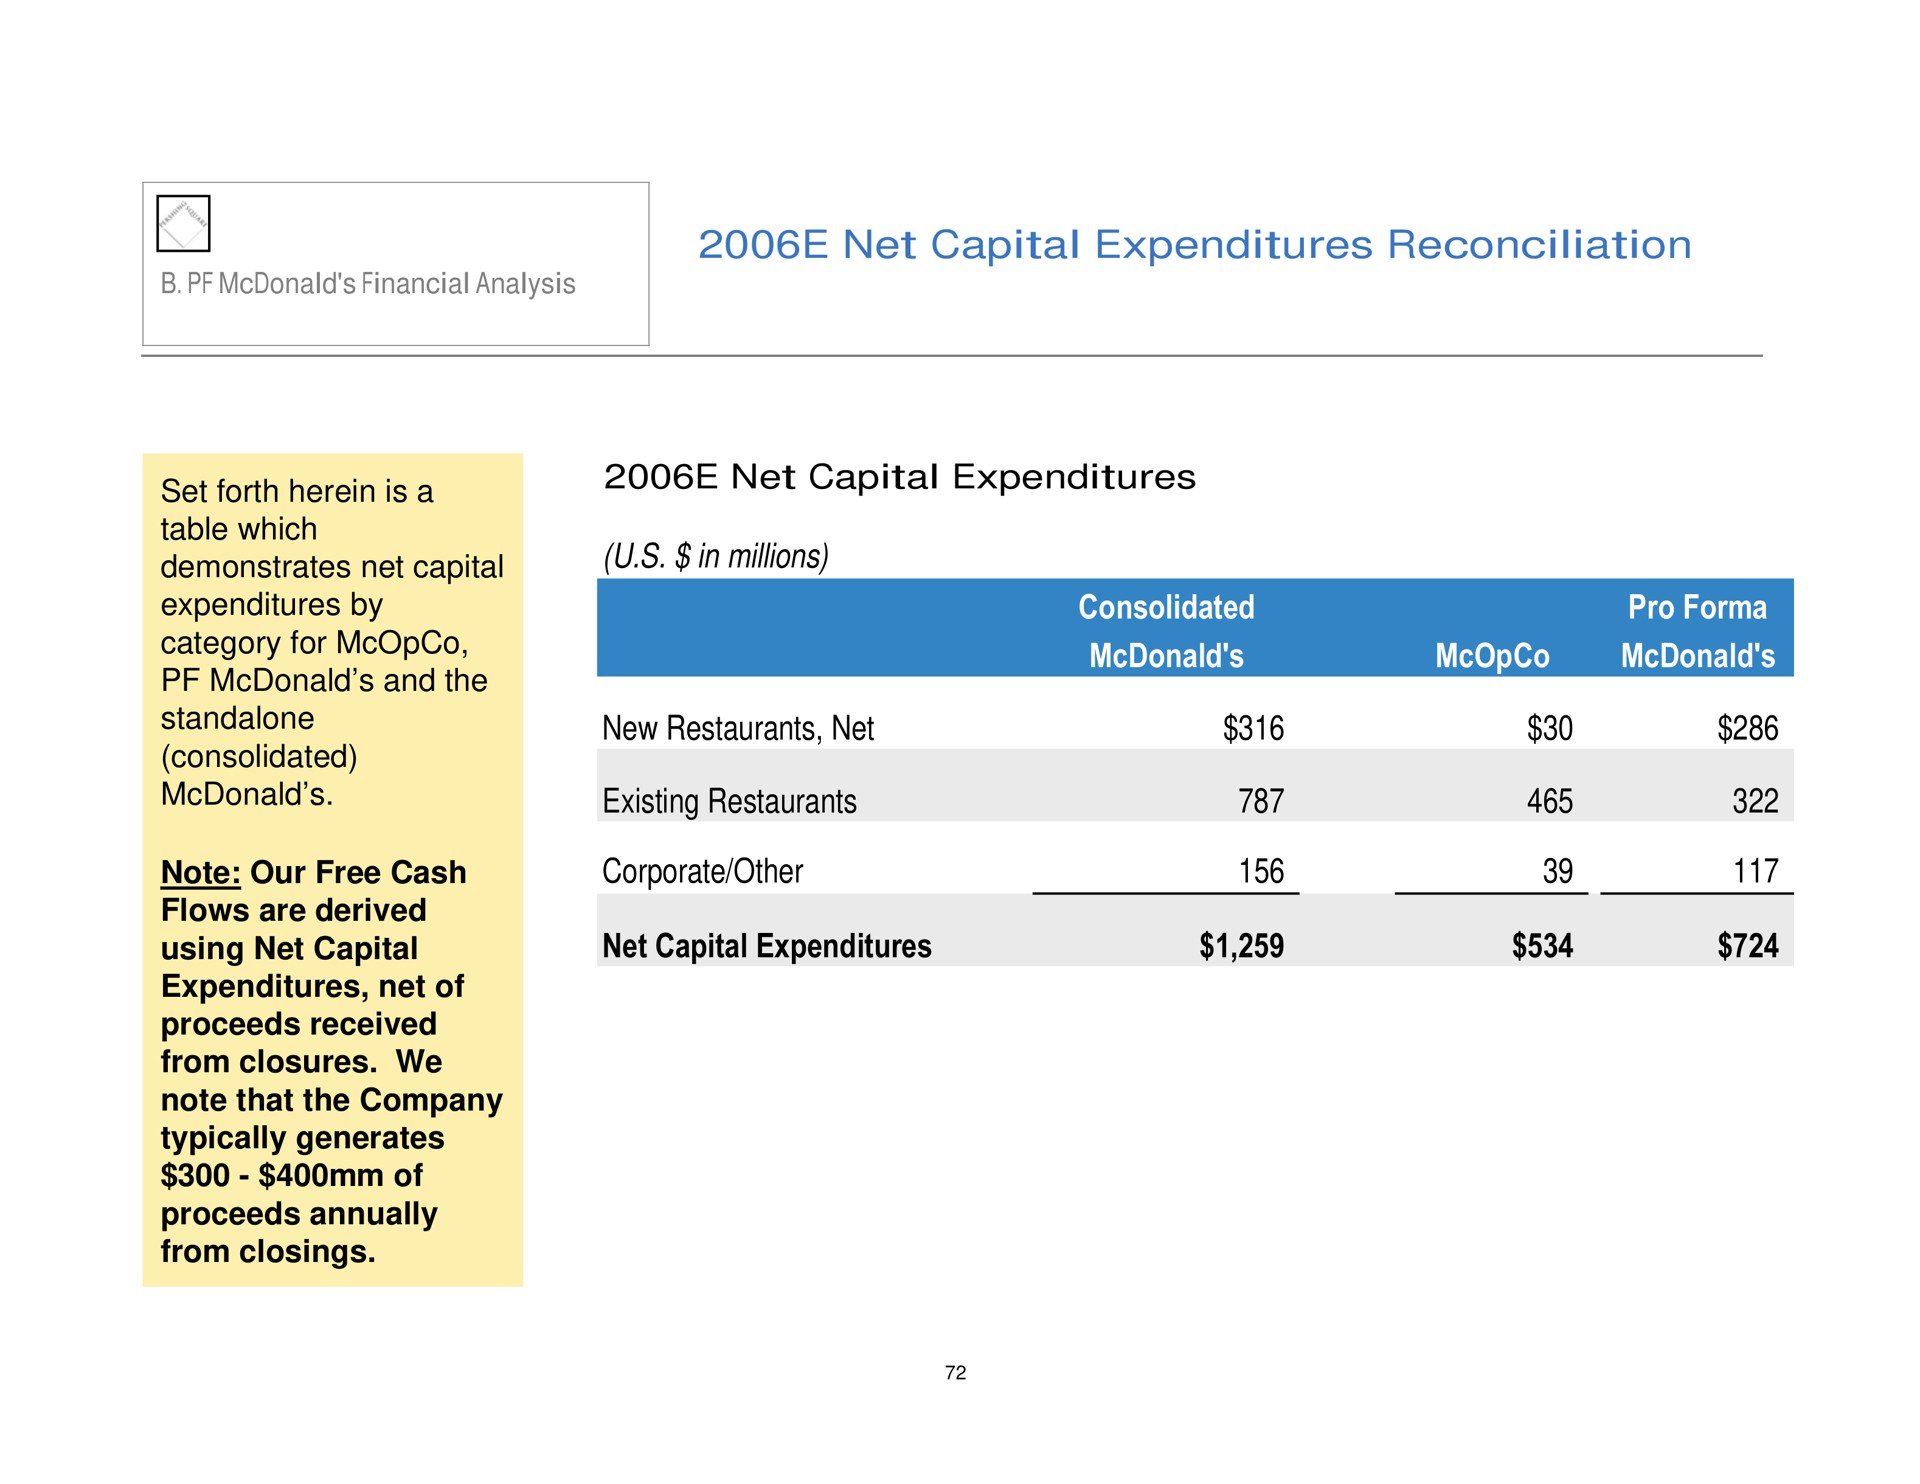 net capital expenditures reconciliation net capital expenditures in millions new restaurants net existing restaurants corporate other net capital expenditures consolidated pro | Pershing Square